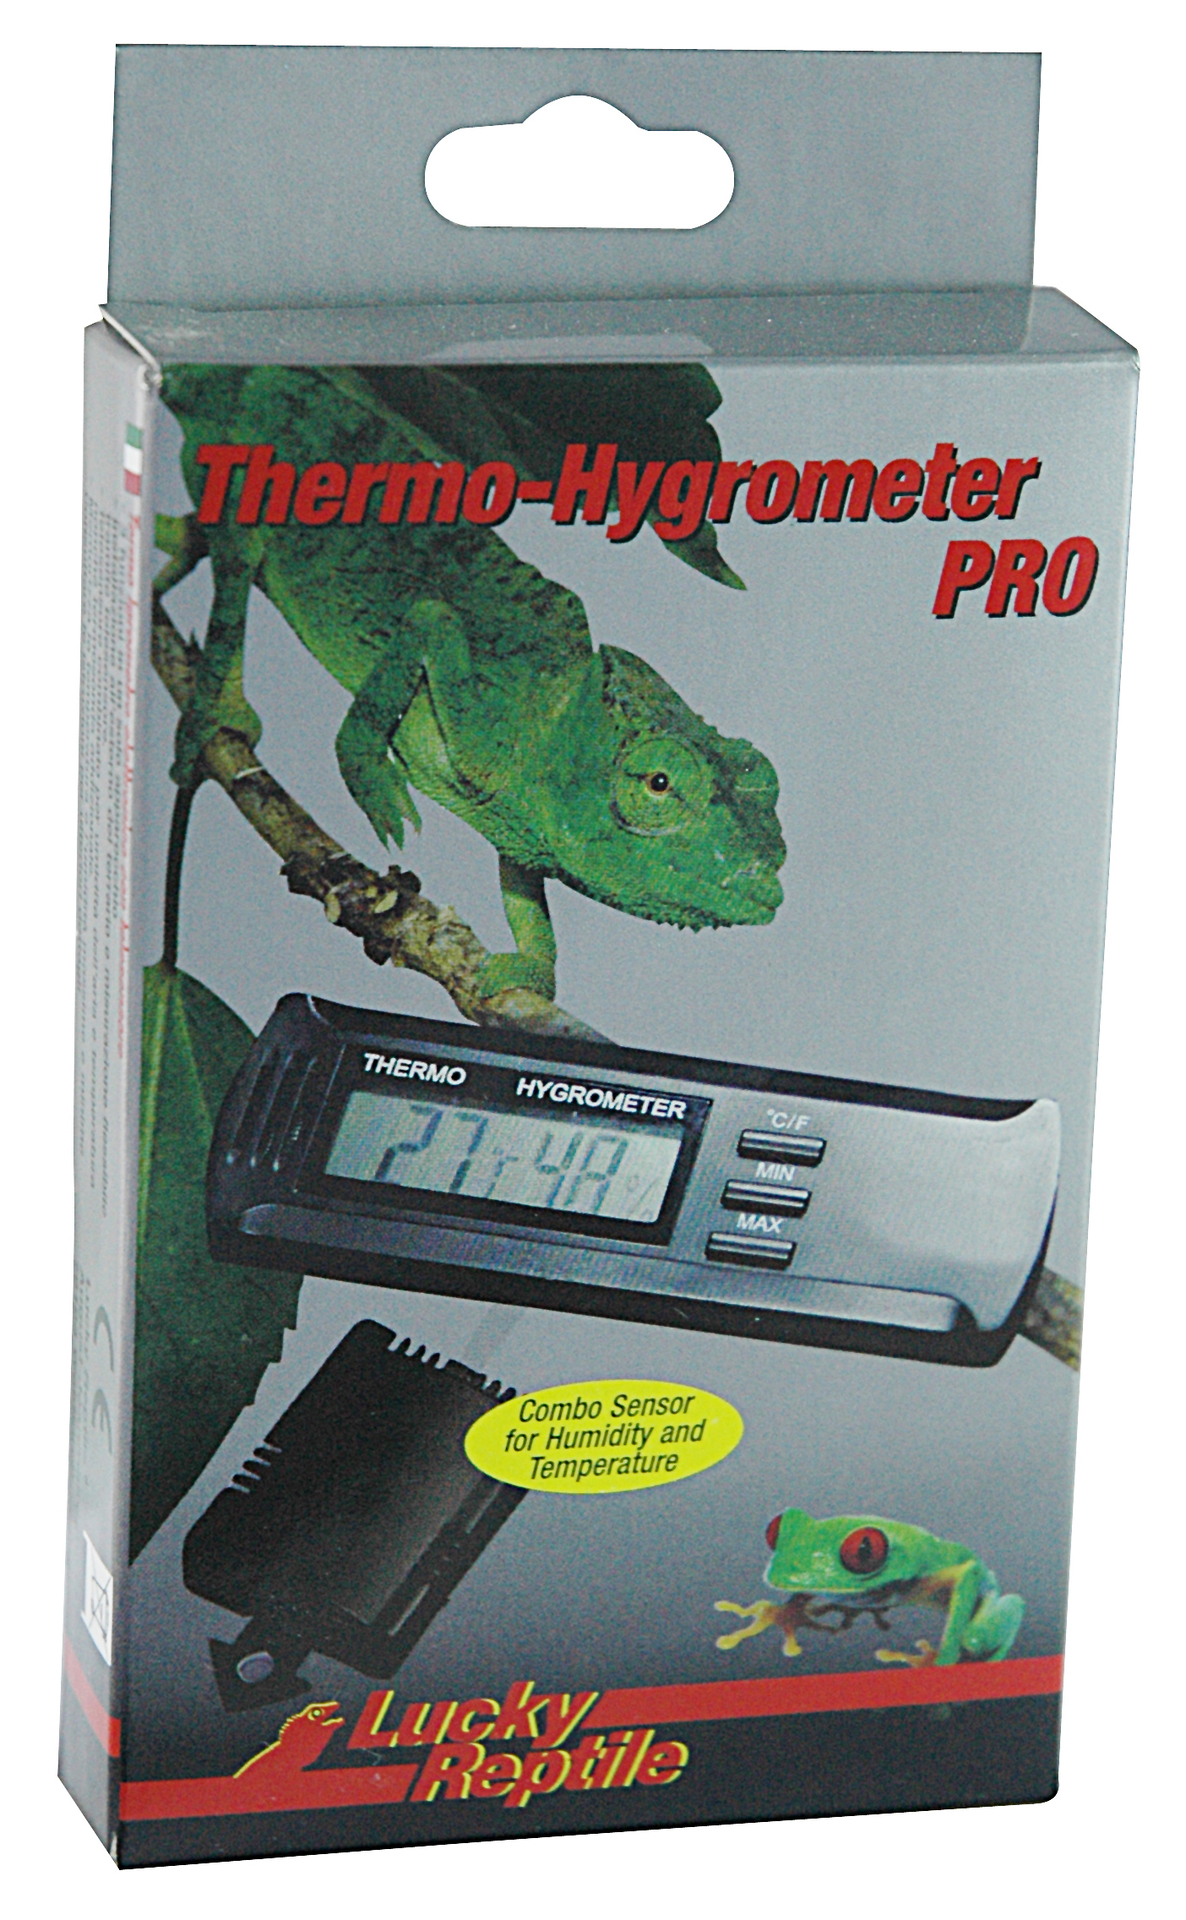 Import-Export Peter Hoch GmbH Thermometer-Hygrometer  PRO